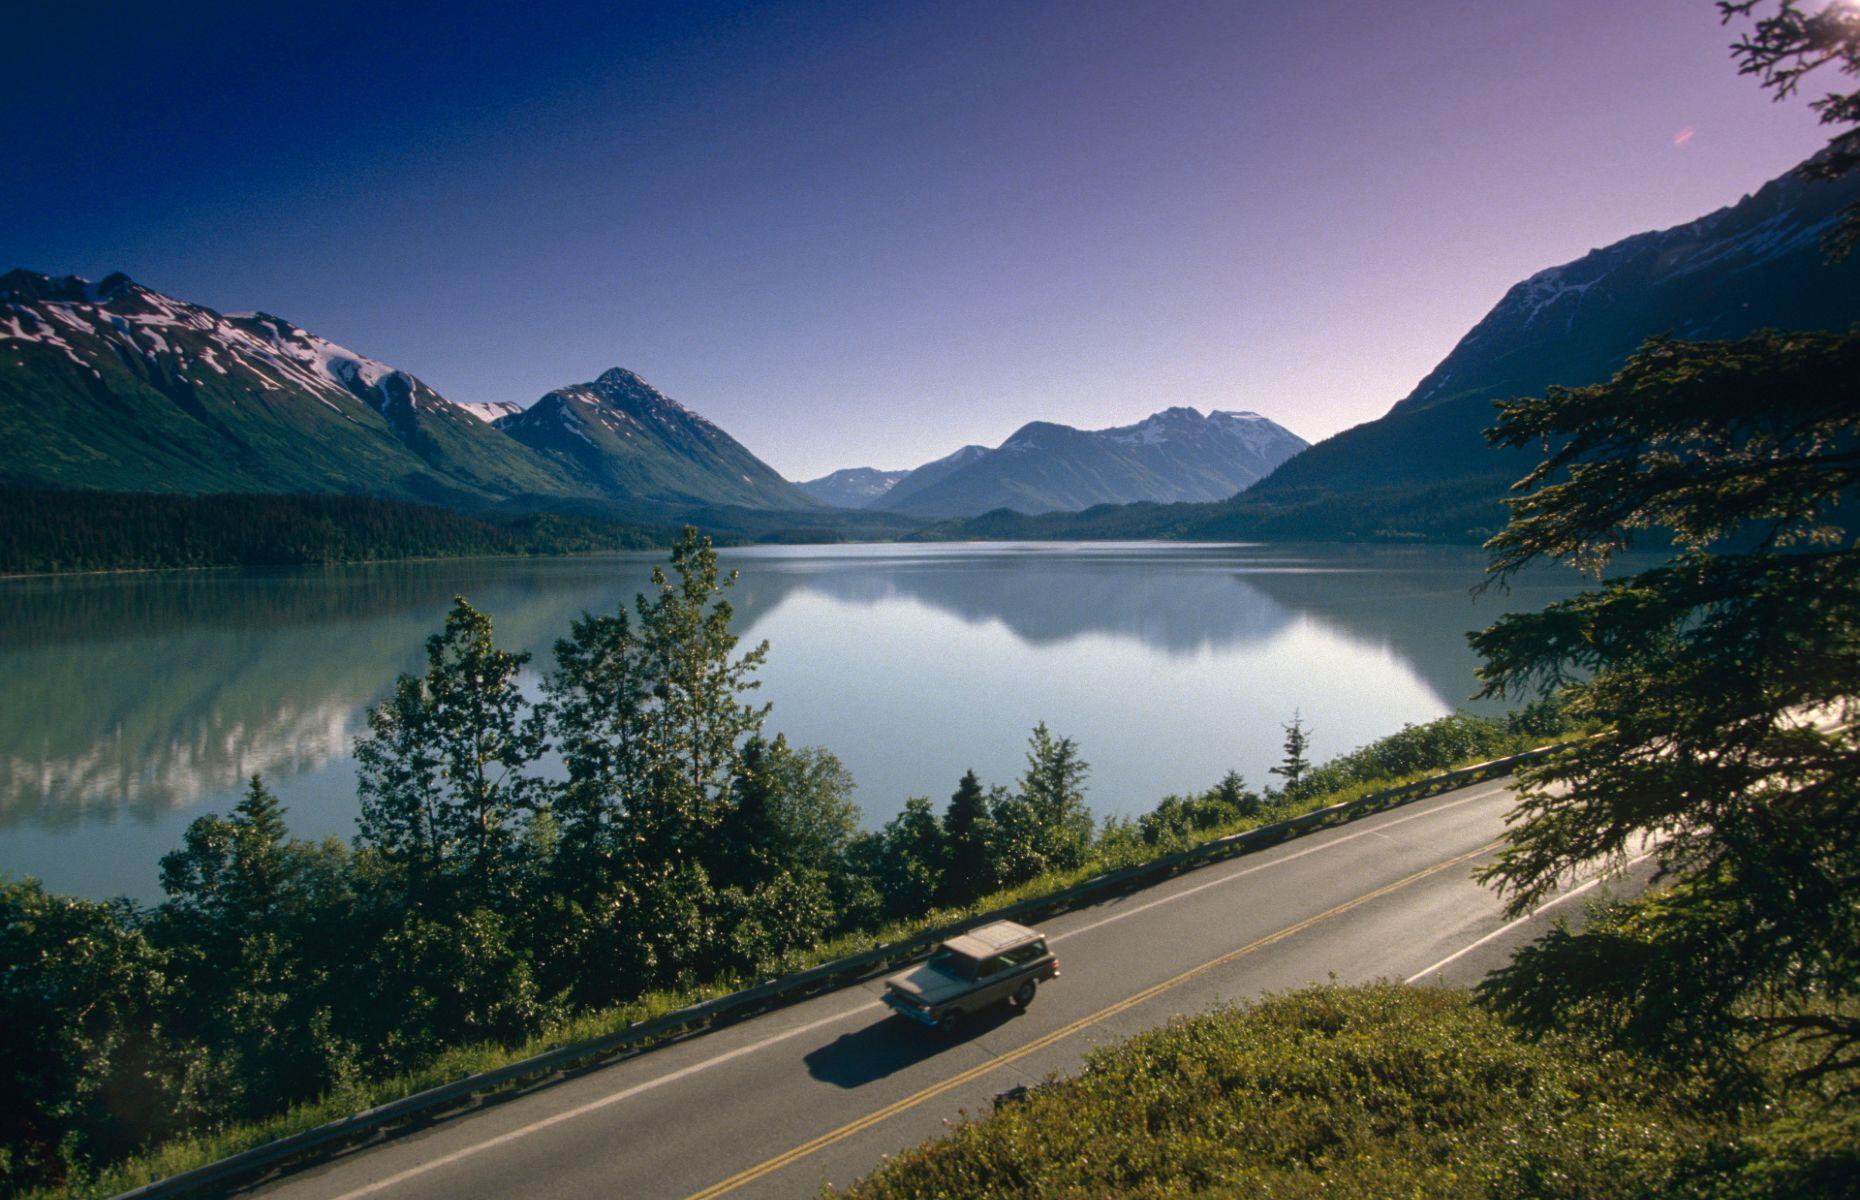 Alaska has remained at the top of many tourists’ wish lists to this day and it’s easy to see why. In this 1990s photograph, a car travels along the scenic Seward Highway Trail on the Kenai Peninsula. We can bet they stopped a few times to take in the incredible views along the way.